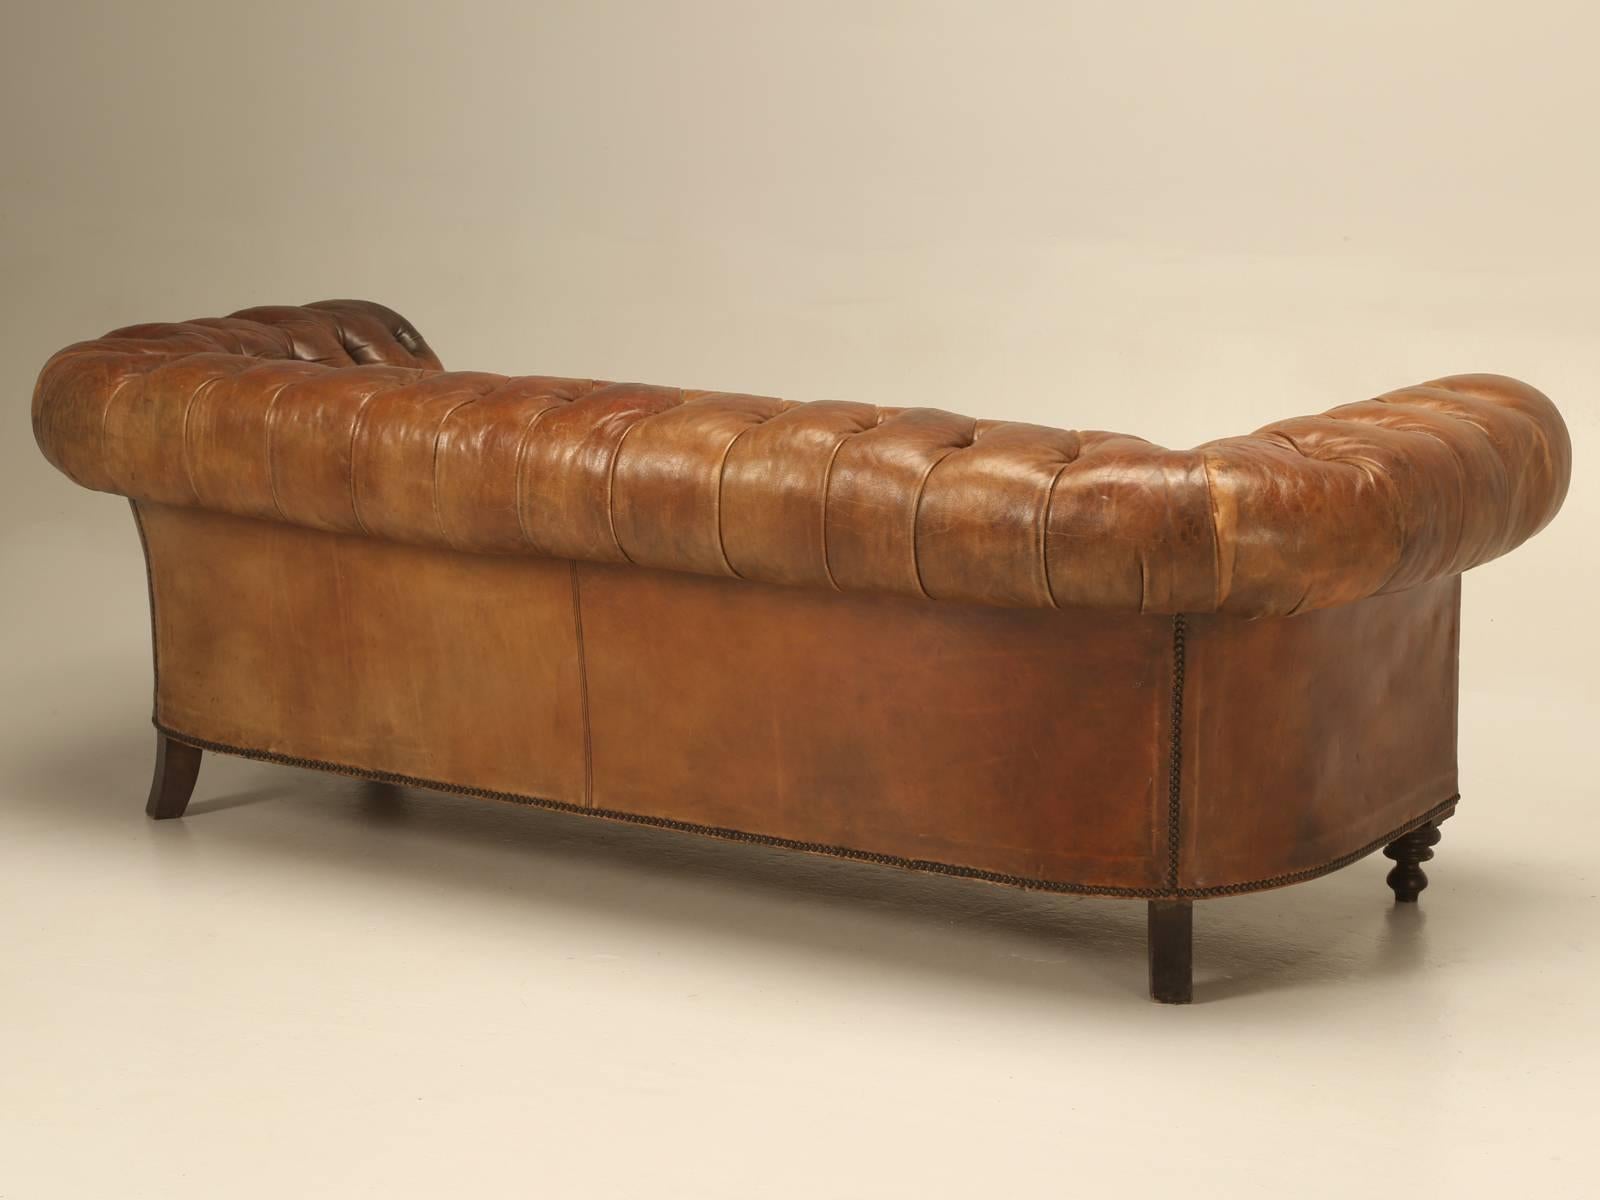 Antique Leather Chesterfield Sofa in Original Leather 1